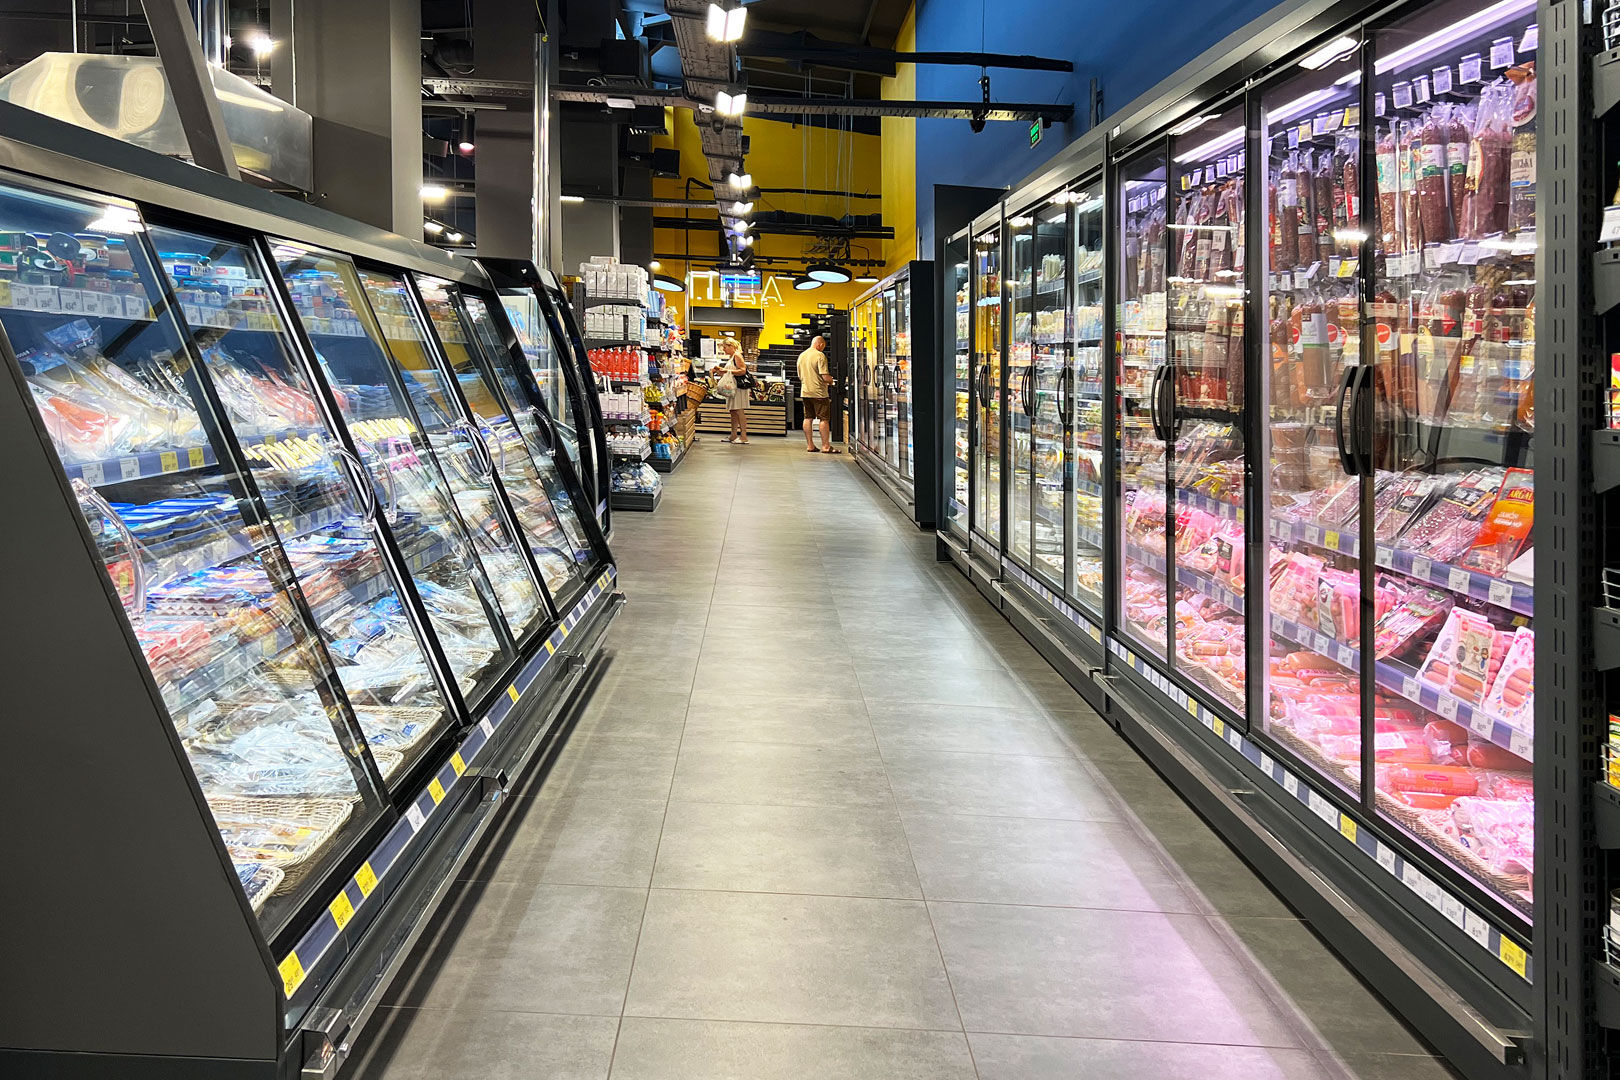 Refrigerated multideck cabinets Indiana MV 080 MT D 205 М, semi-vertical cabinets Louisiana eco MSV 105 MT D, supermarket Fora